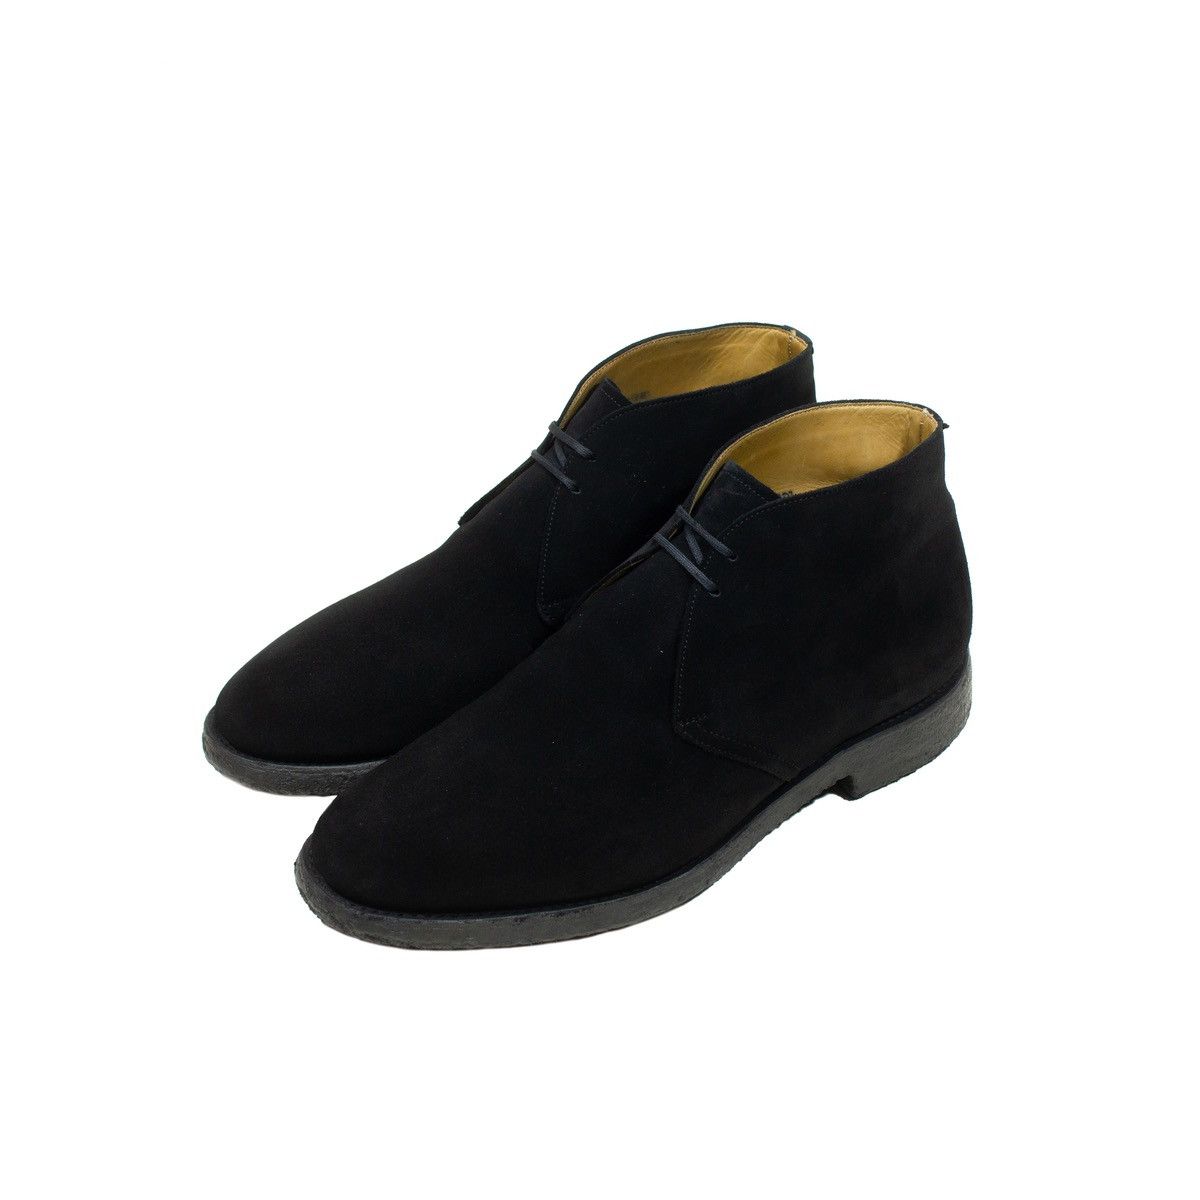 Churchs 760$ Church's Chukka Boot With Crepe Sole In Black Suede | Grailed